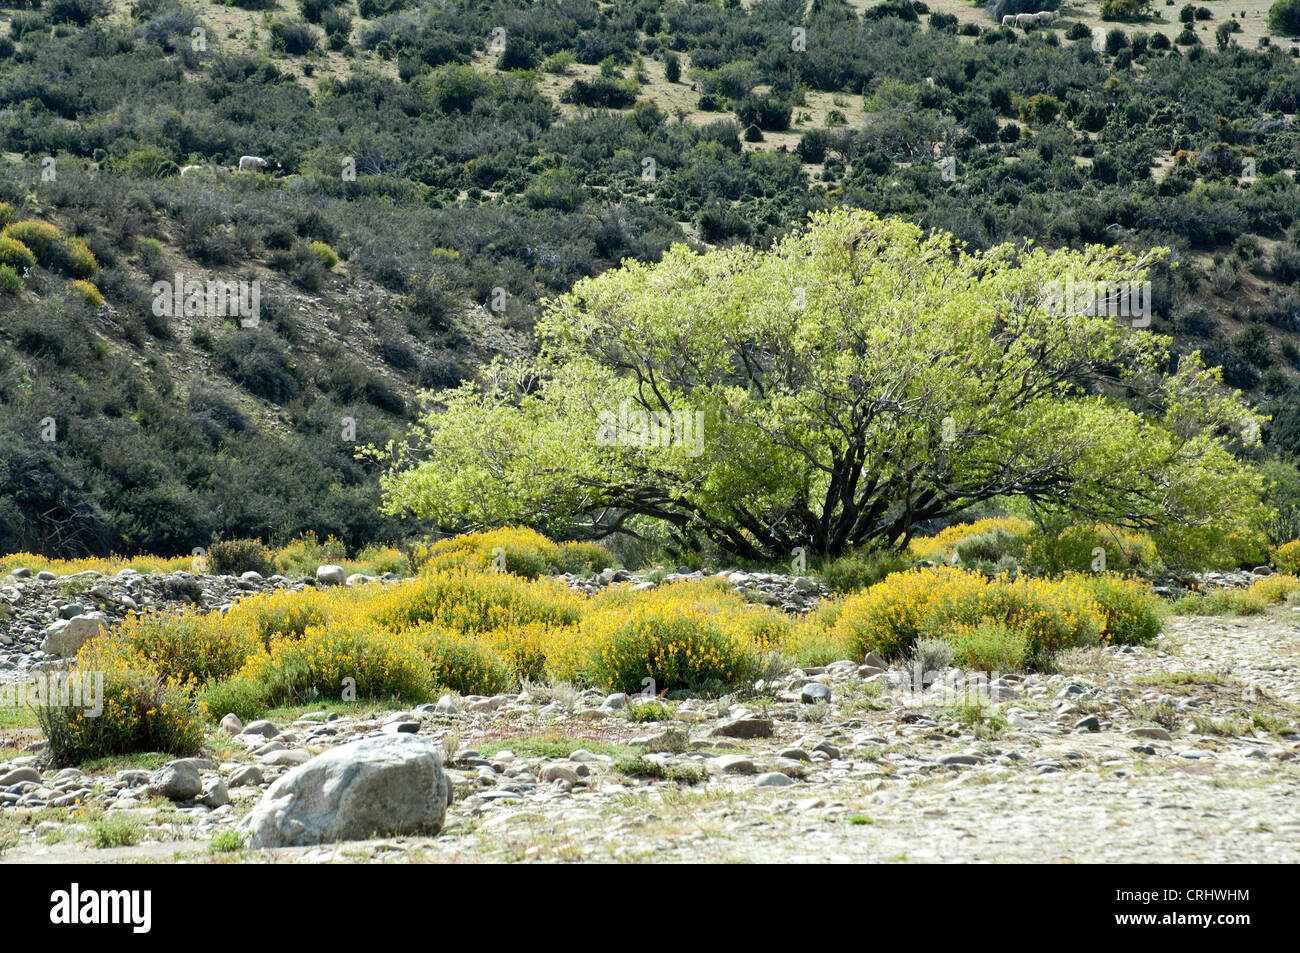 Junellia tredens grows on the hillside, Adesmia boronioides  and willow grow on shore of Centinela River Argentinian steppes Stock Photo